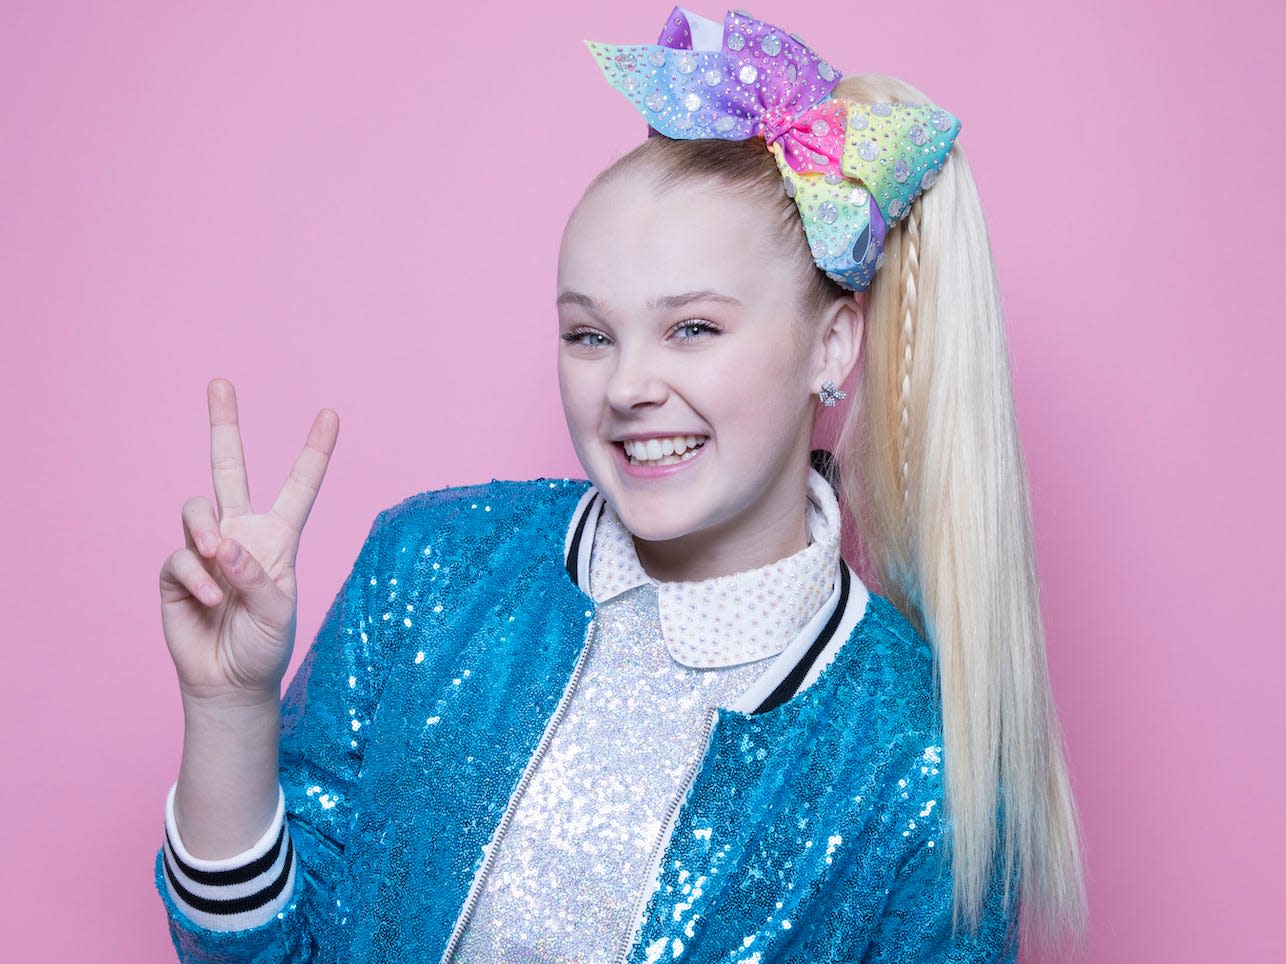 Jojo Siwa S Fans Are Cautioning Not To Label The Star S Sexuality Amid Coming Out Speculation